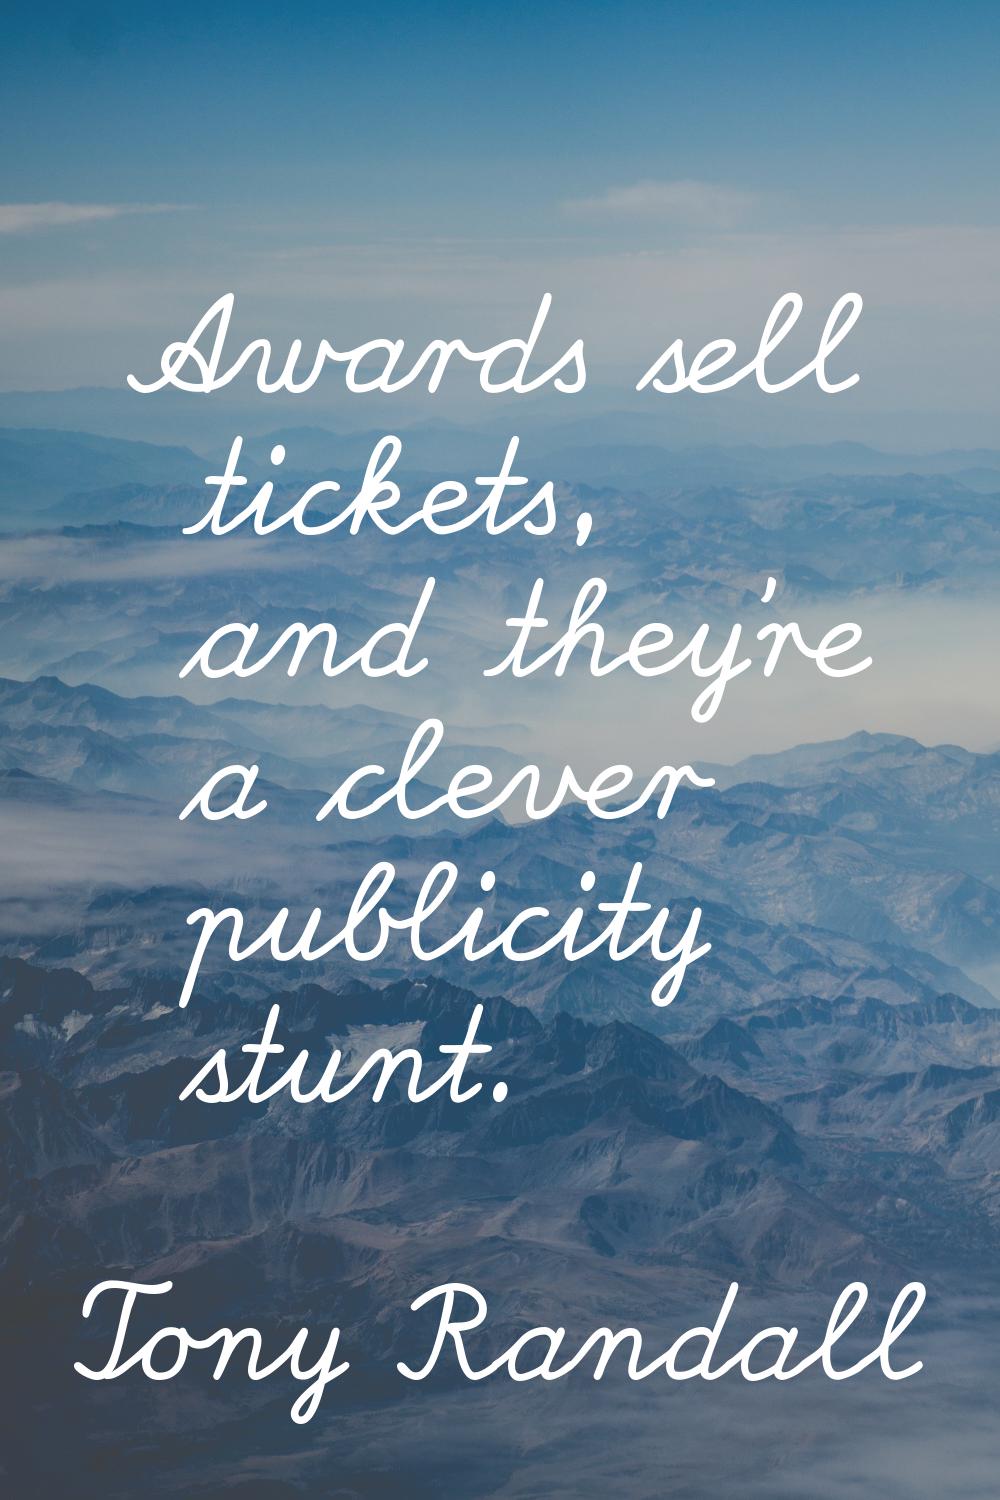 Awards sell tickets, and they're a clever publicity stunt.